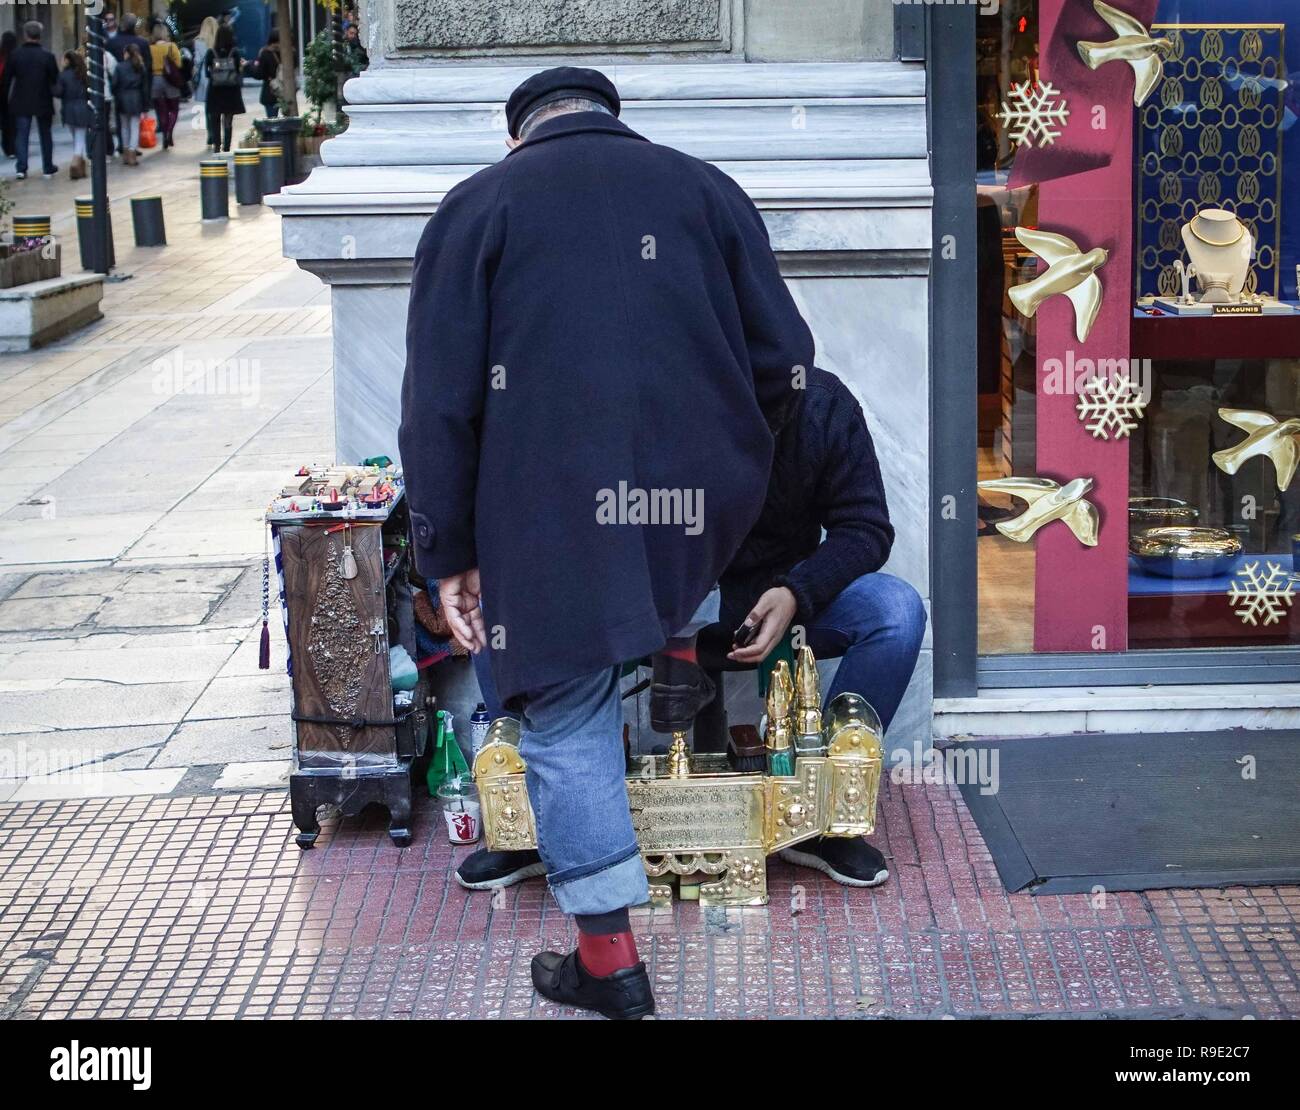 Athens, Greece. 23rd Dec, 2018. A street vendor seen brushing the shoes of  a man in Central Athens. Credit: Ioannis Alexopoulos/SOPA Images/ZUMA  Wire/Alamy Live News Stock Photo - Alamy